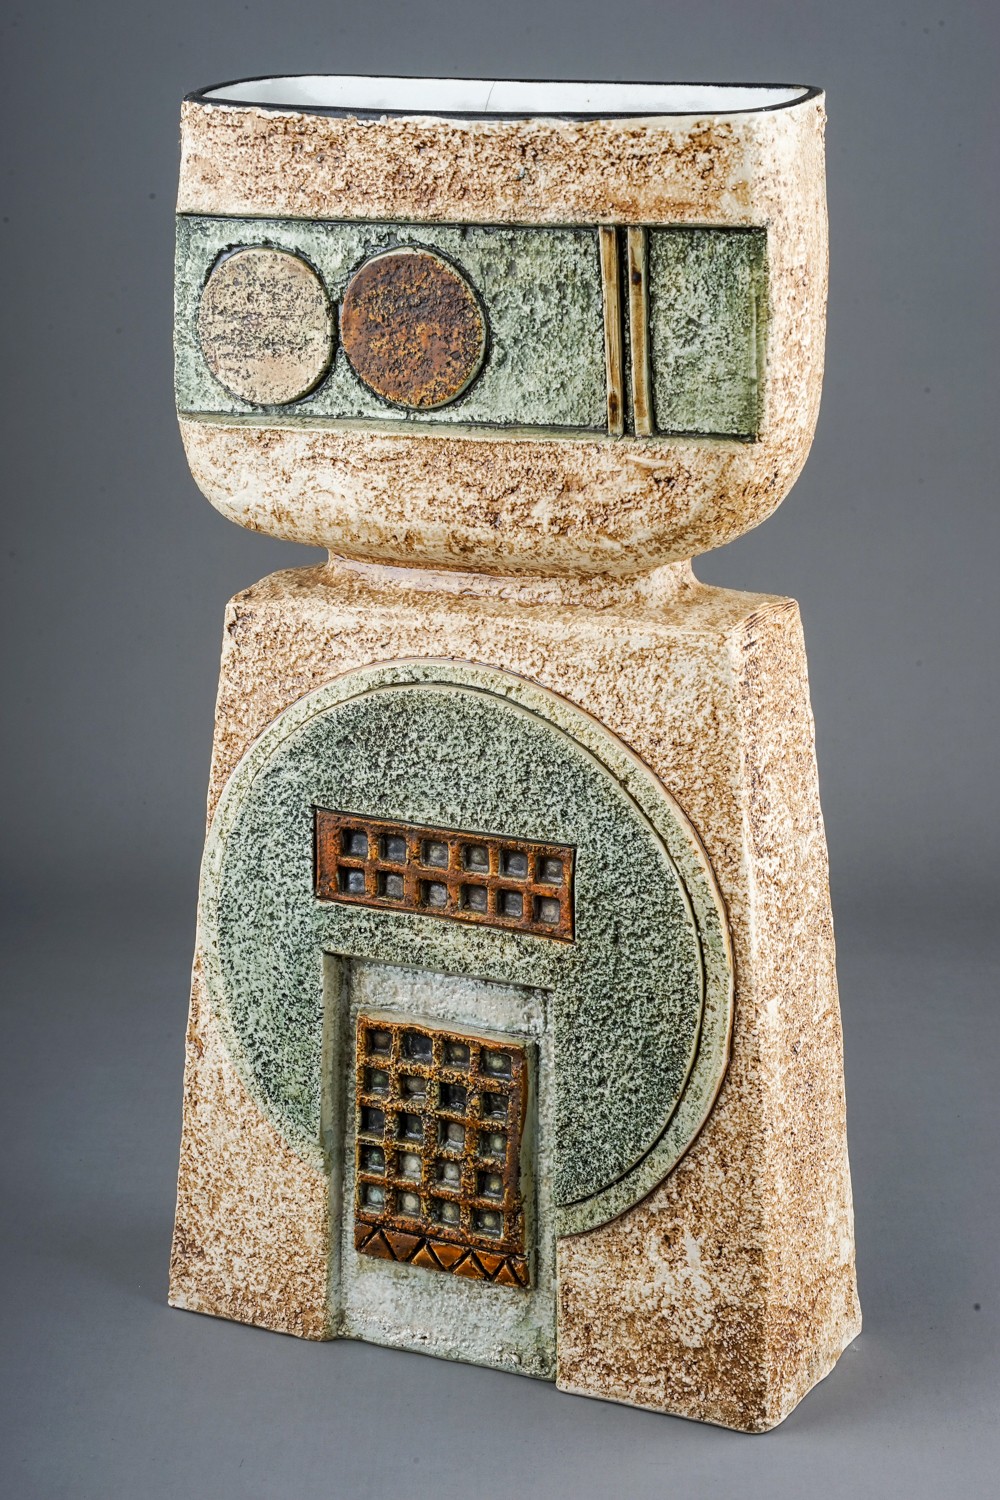 A Troika Pottery double base vase, cast in low relief with geometric panels in shades of ivory and - Image 2 of 8